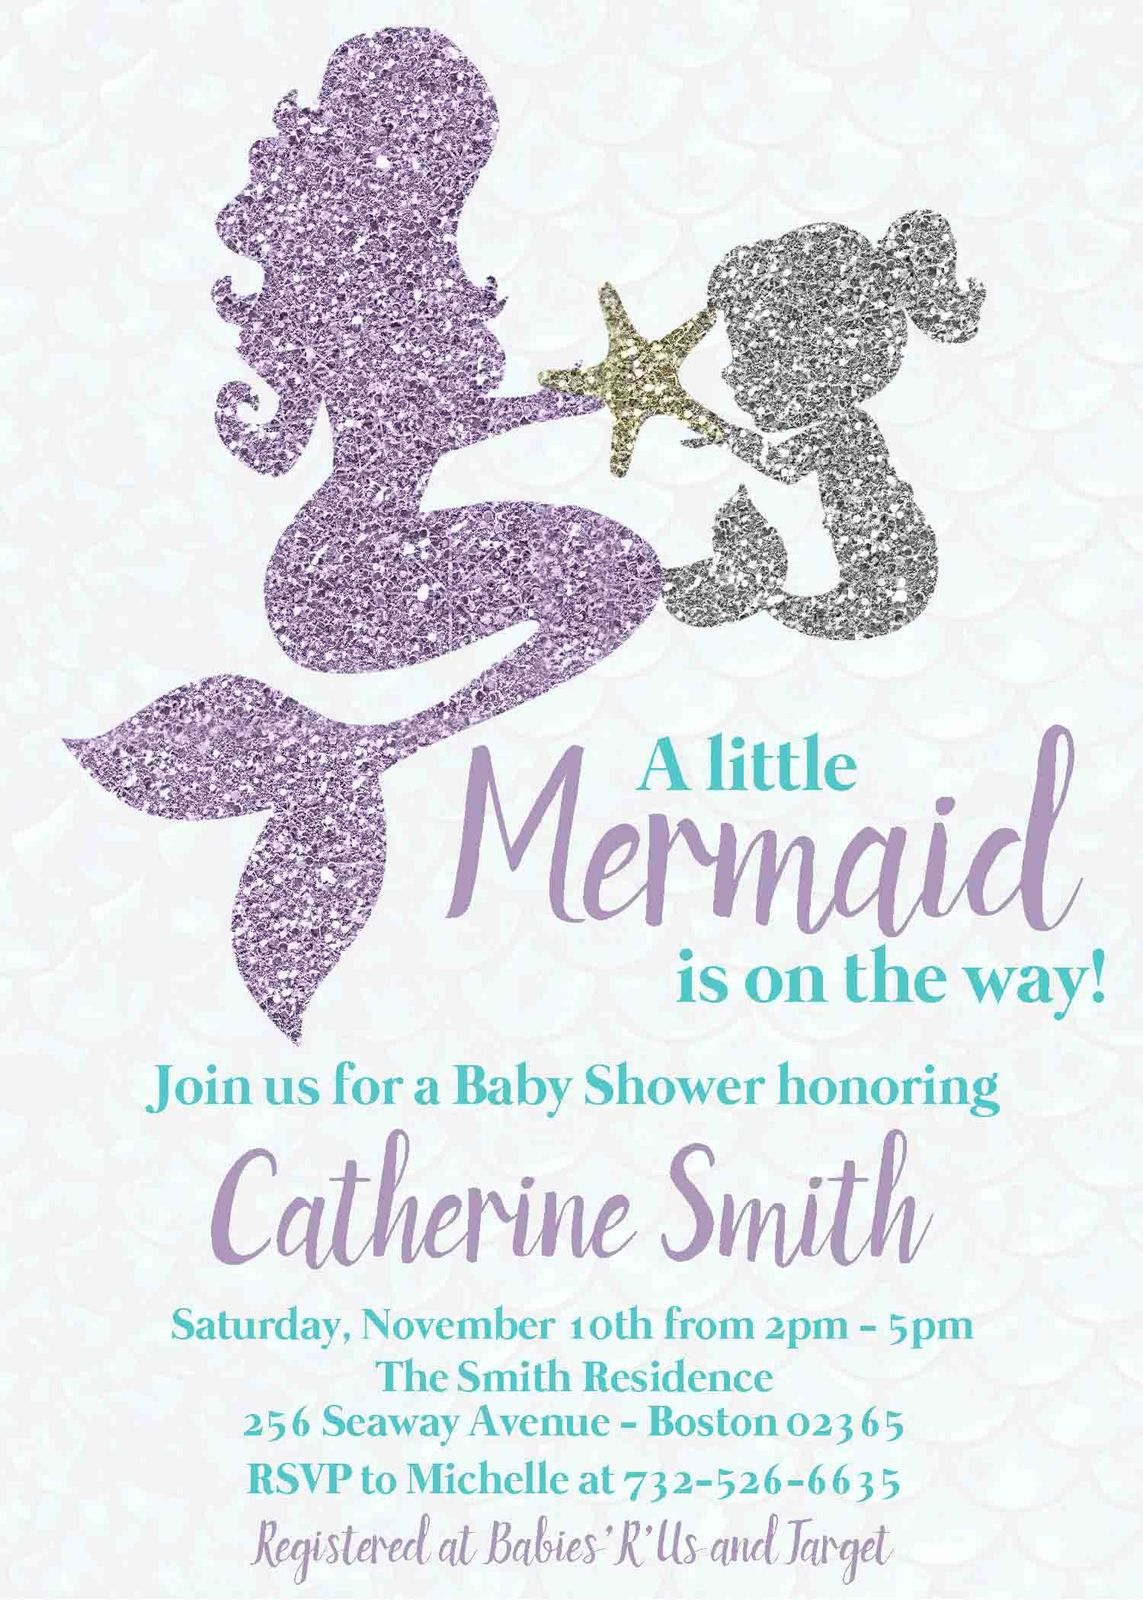 Full Size of Baby Shower:cheap Invitations Baby Shower Pinterest Baby Shower Ideas For Girls Baby Girl Themed Showers Pinterest Nursery Ideas Elegant Baby Shower Nursery For Girls Baby Shower Ideas Baby Shower Invitations For Boys